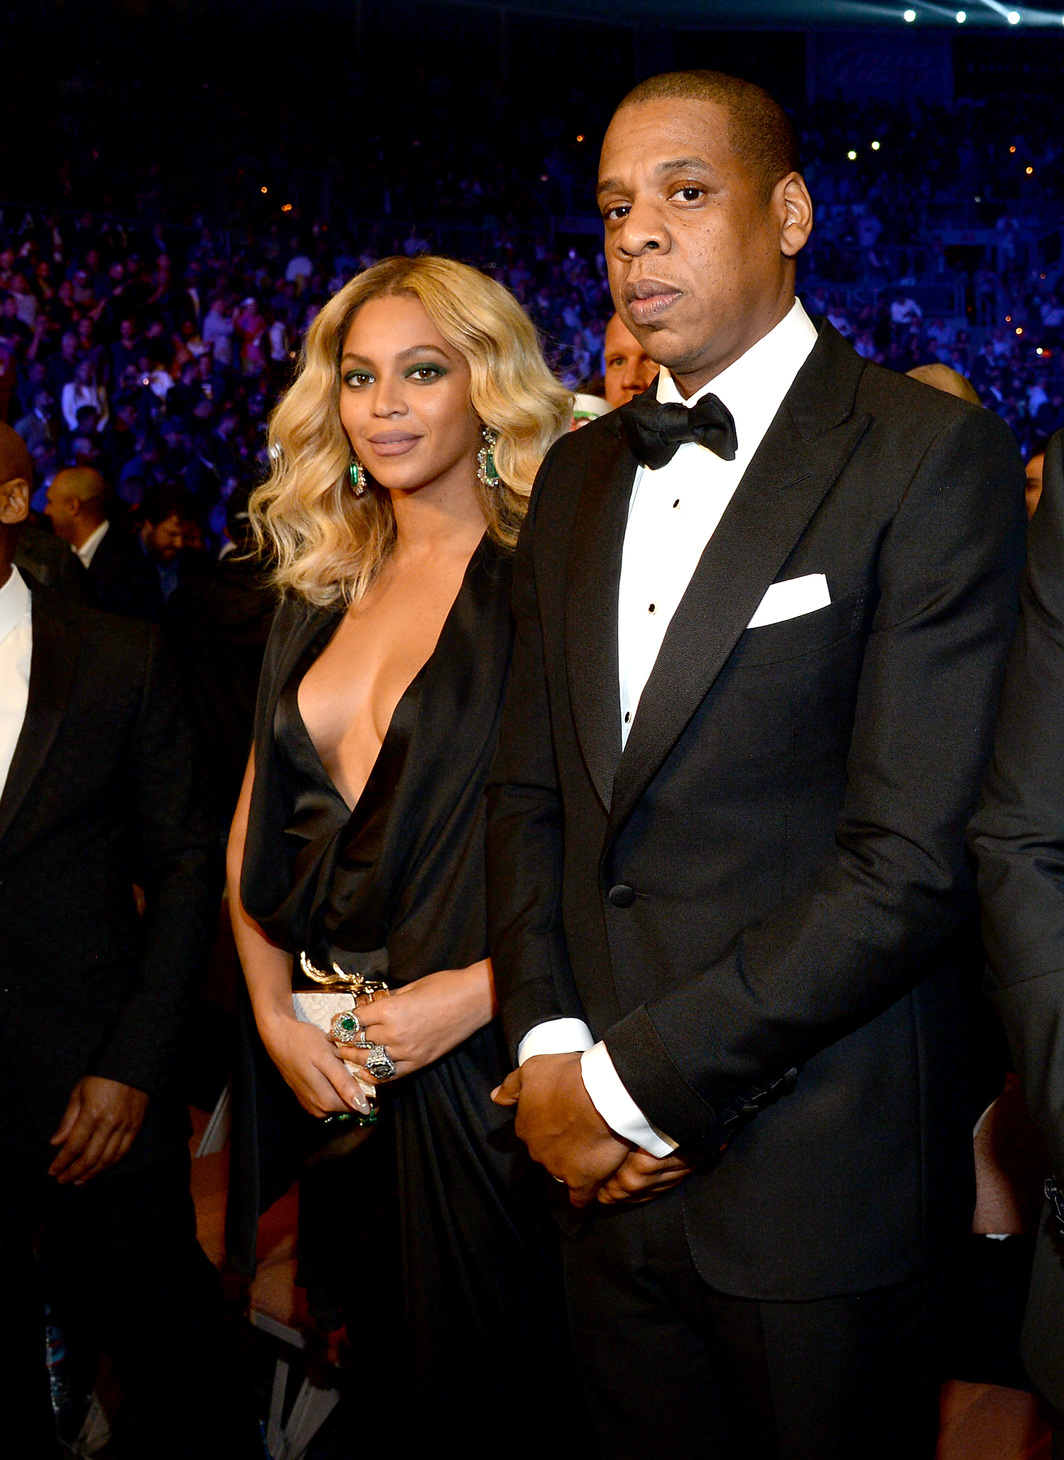 Fergie, Beyoncé and More Celebs Who Stayed With Their Cheating Husbands!